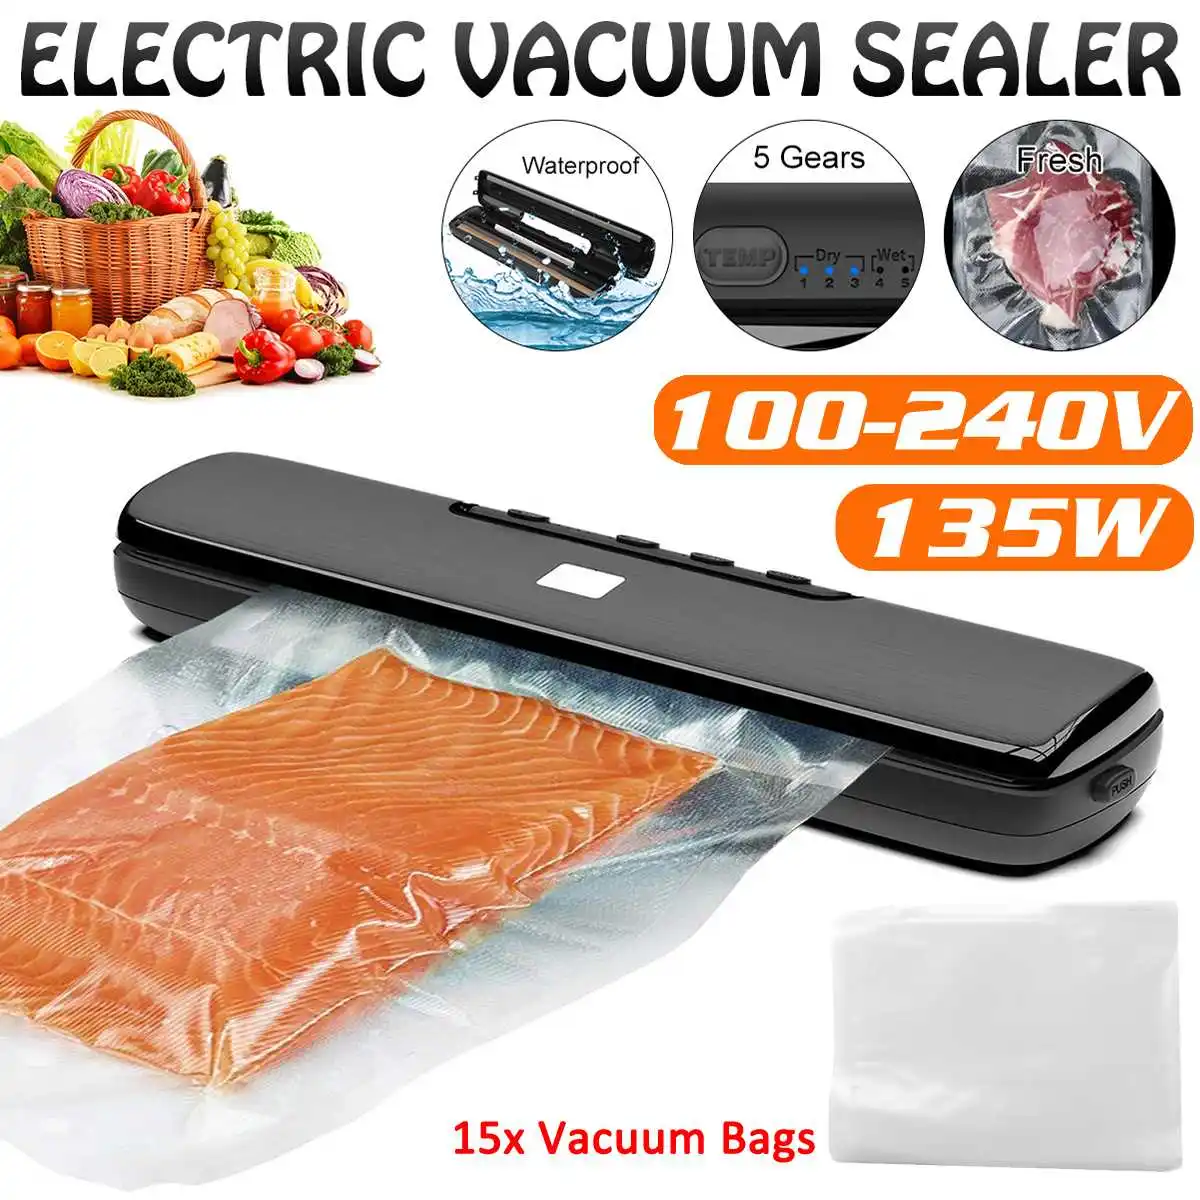 

New Vacuum Packing Machine 100V-240V Commercial Household Food Vacuum Sealer Film Sealer Vacuum Packer Include 15Pcs Bags